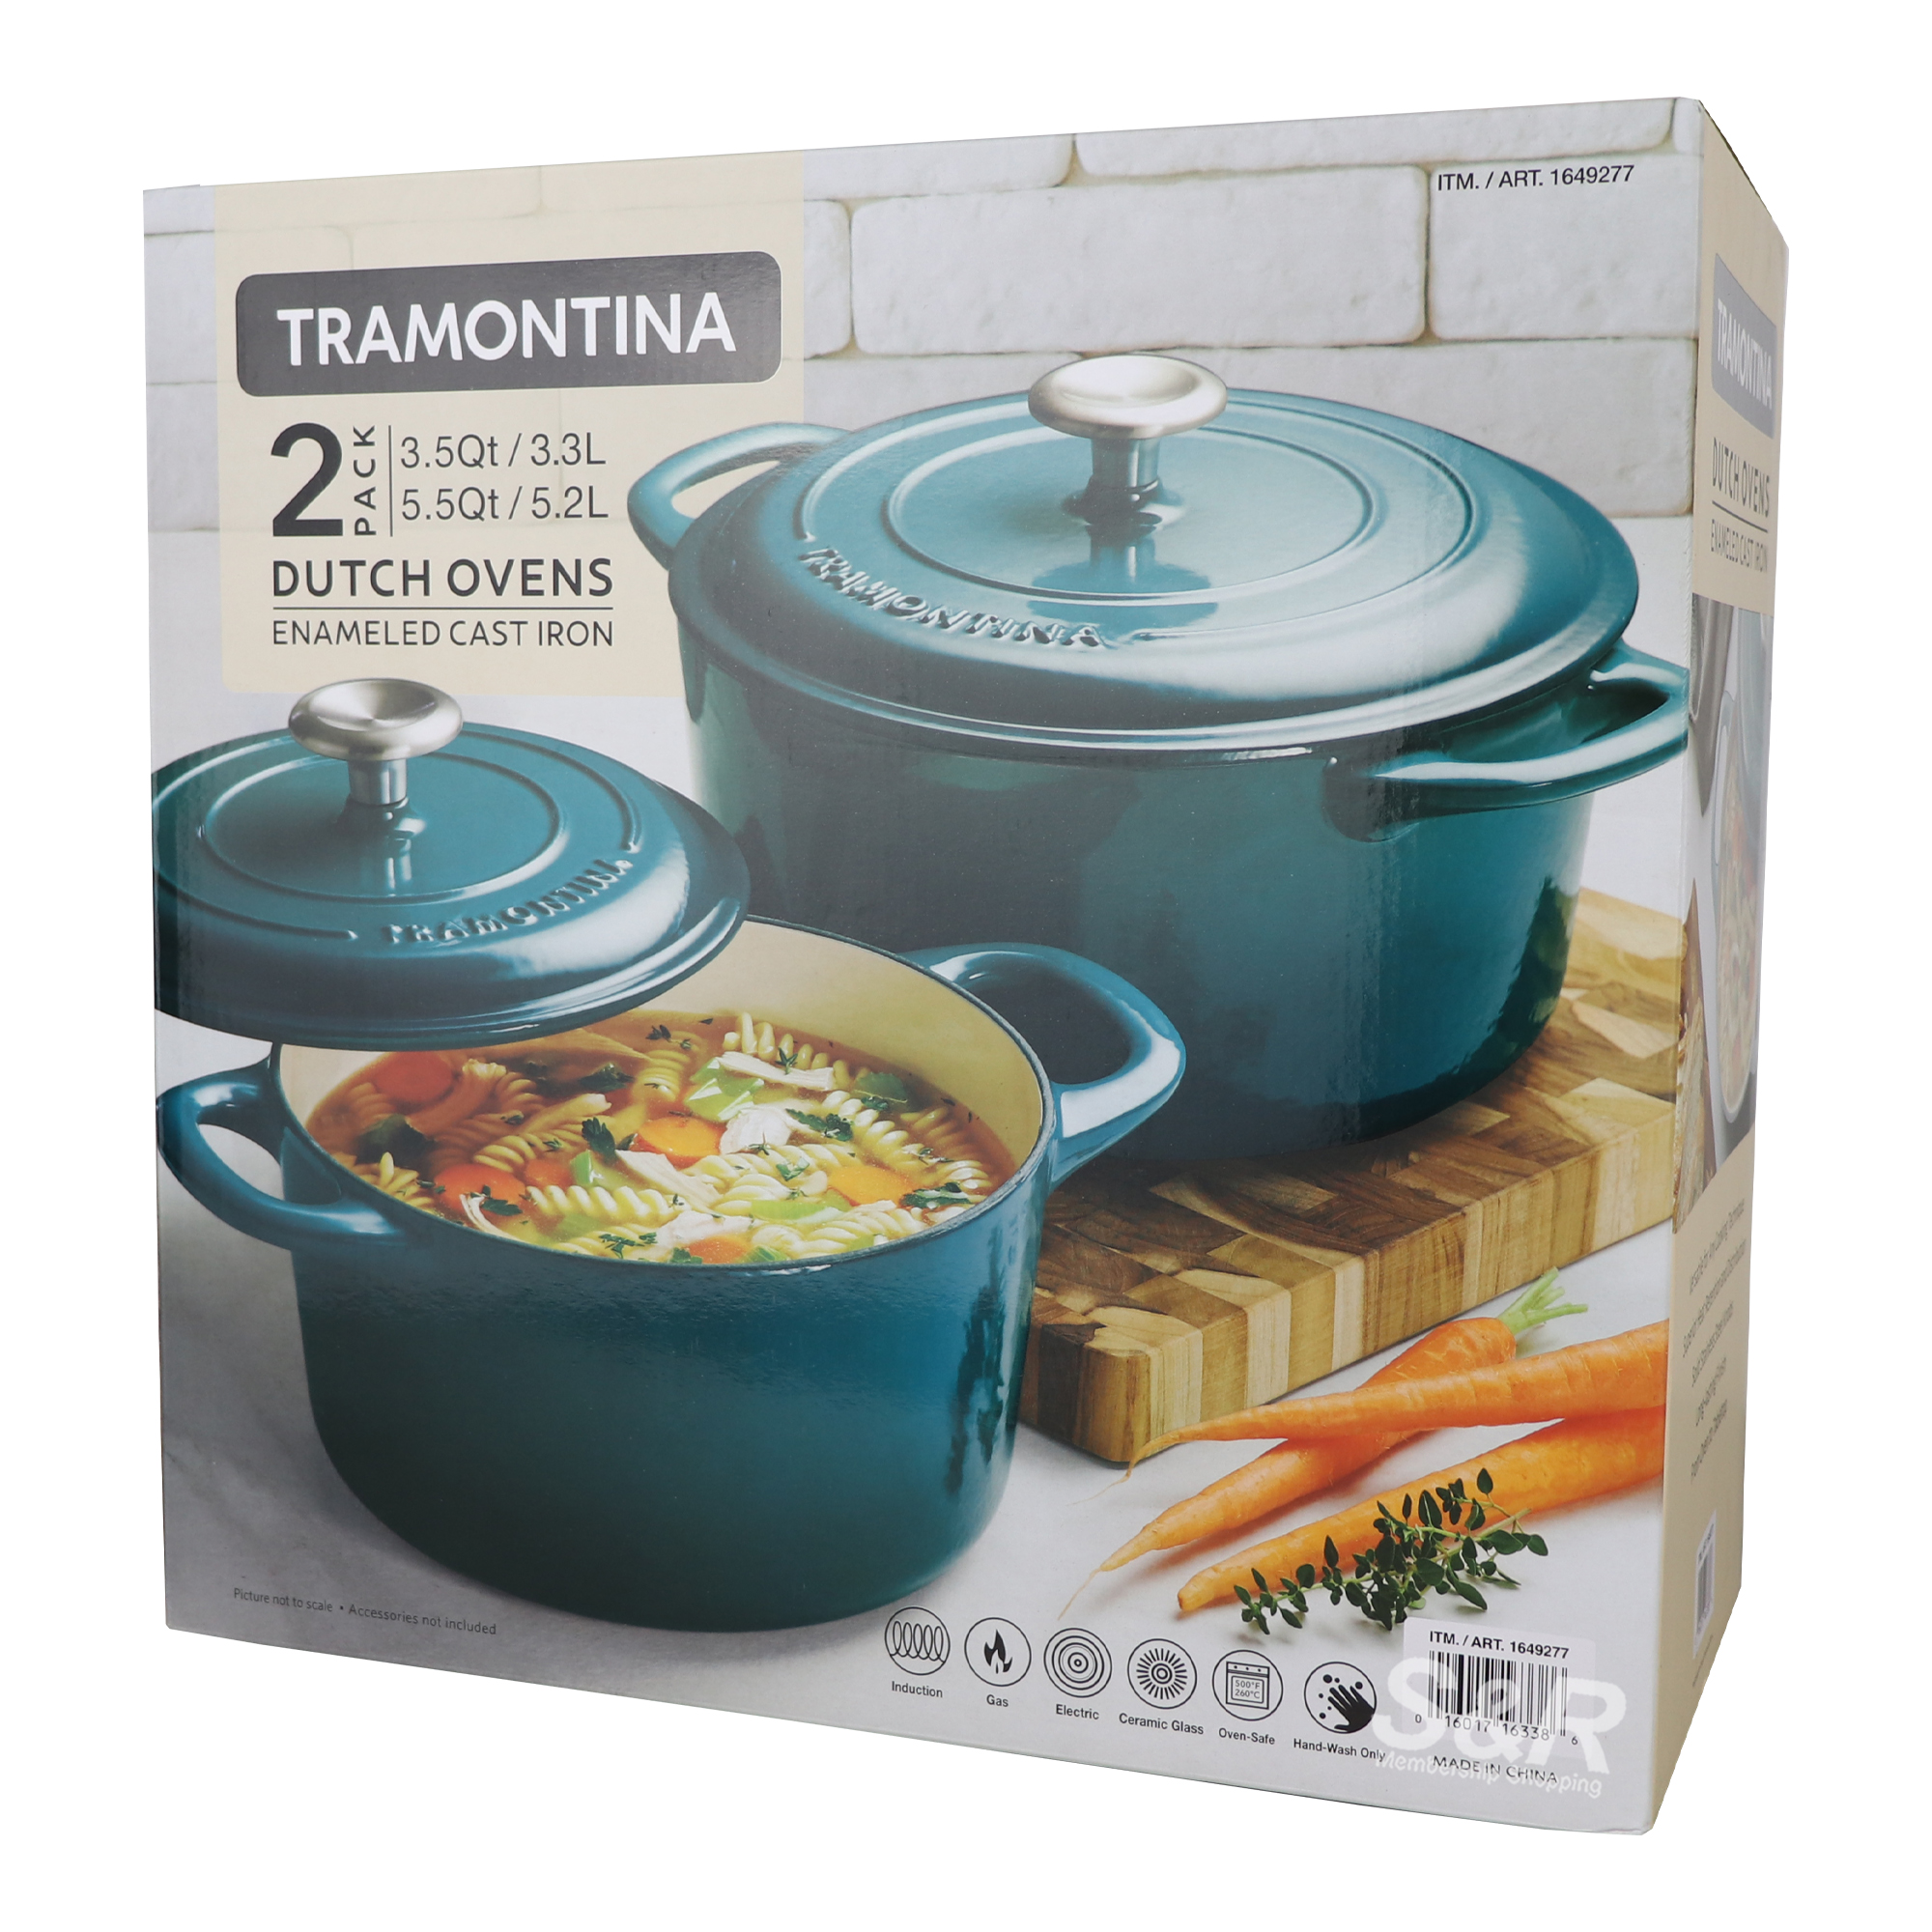 Tramontina Enameled Cast Iron Dutch Ovens 3.5 QT and 5.5 QT in Teal